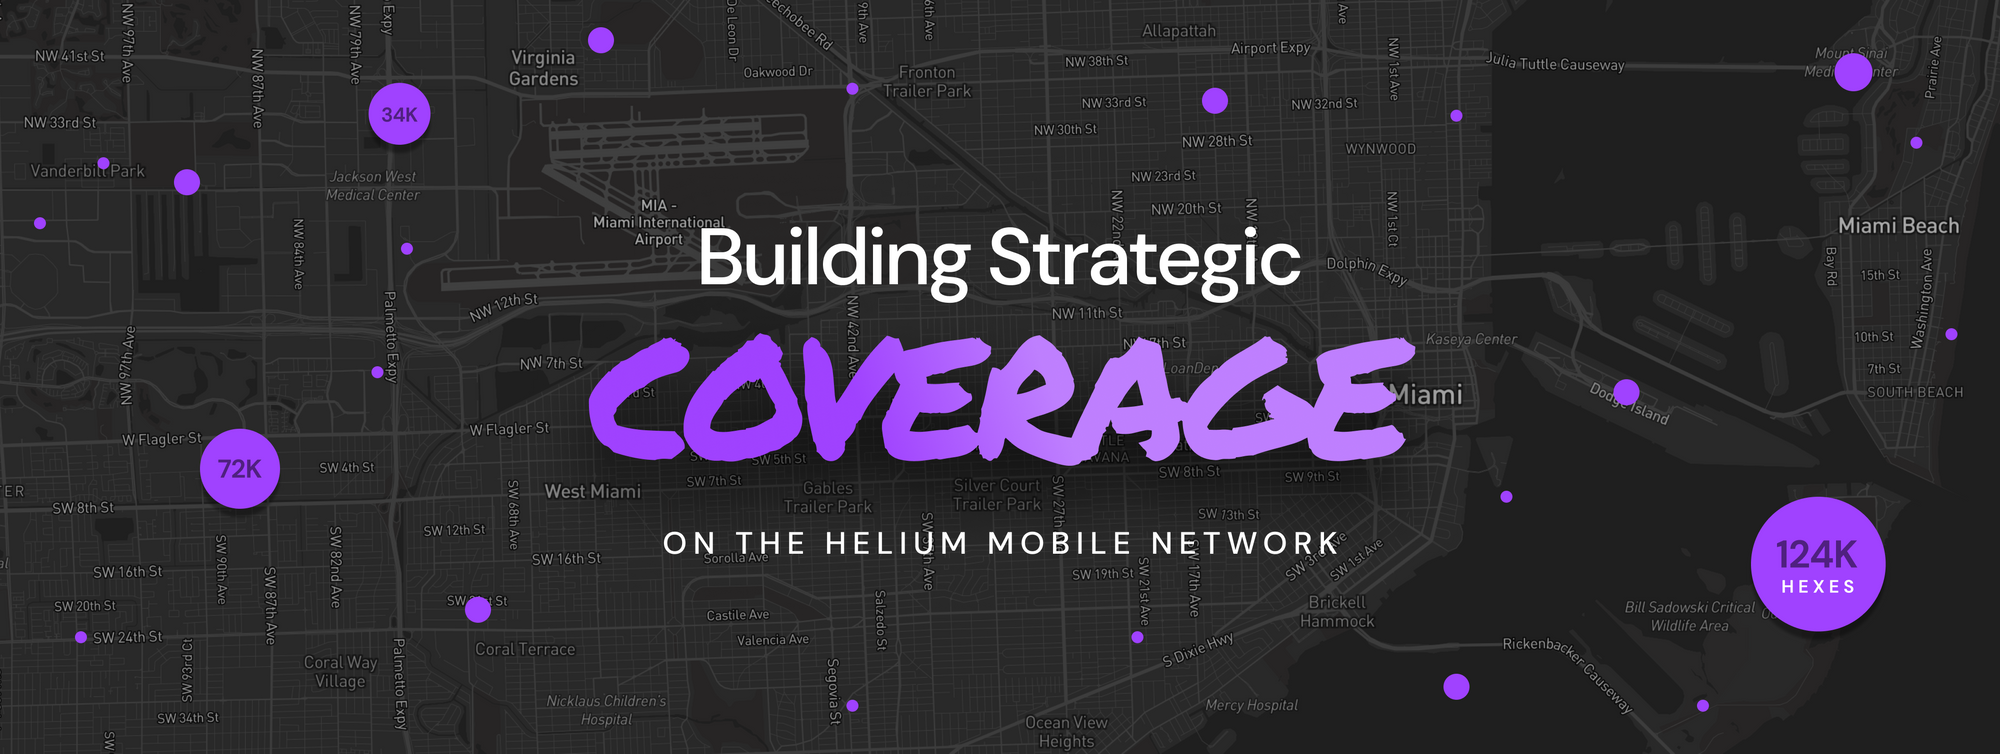 Building Strategic Coverage on the Helium Mobile Network